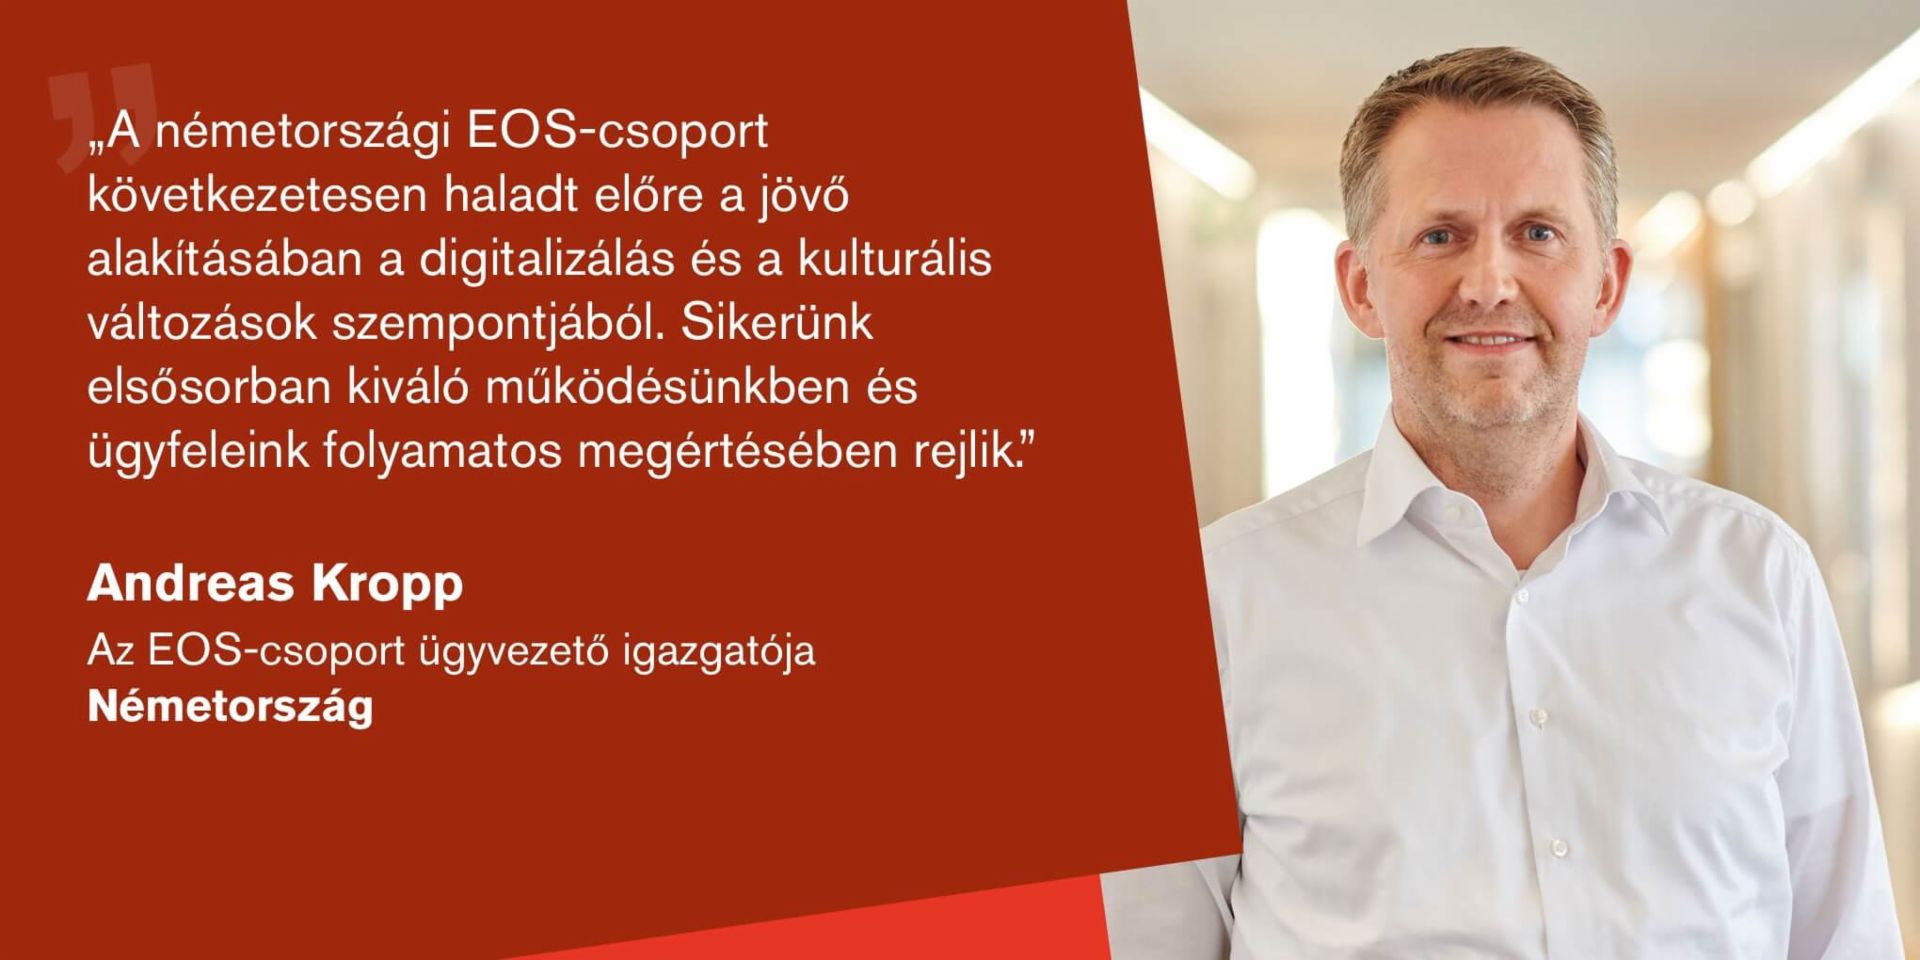 Quote from Andreas Kropp, Managing Director of the EOS Group and responsible for Germany: "EOS Germany has continued to consistently drive forward digitalization and cultural change this year."